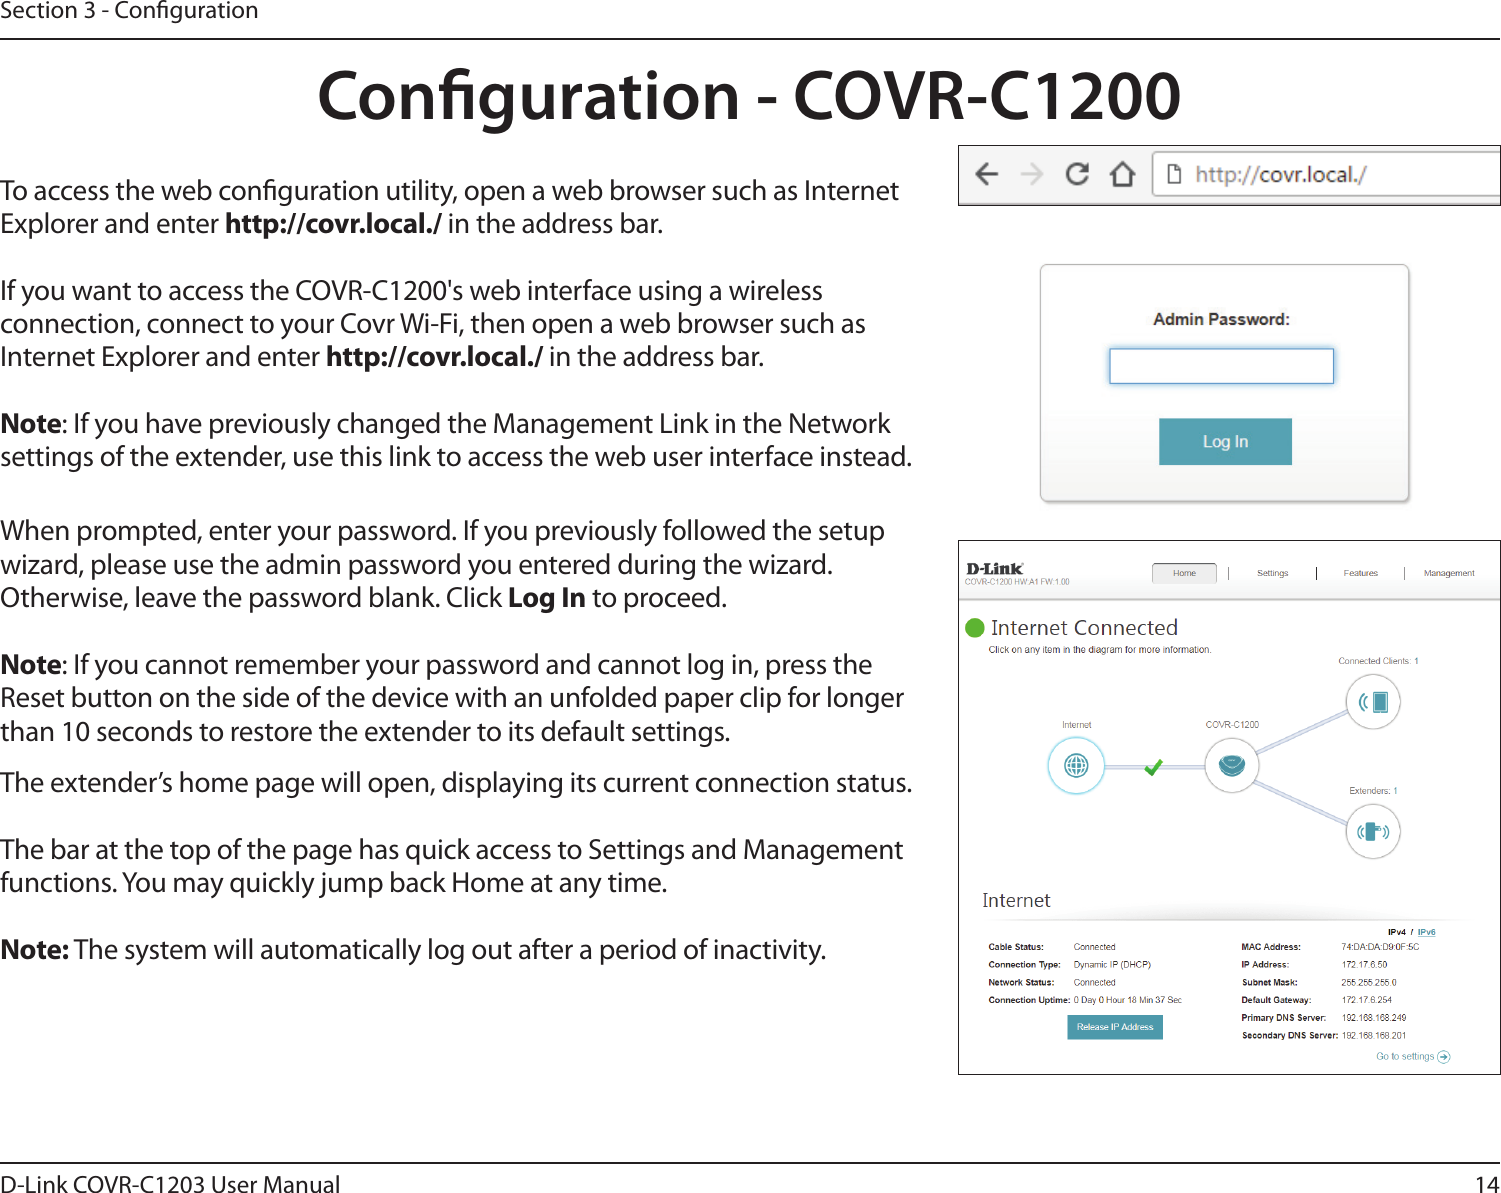 14D-Link COVR-C1203 User ManualSection 3 - CongurationConguration - COVR-C1200When prompted, enter your password. If you previously followed the setup wizard, please use the admin password you entered during the wizard. Otherwise, leave the password blank. Click Log In to proceed.Note: If you cannot remember your password and cannot log in, press the Reset button on the side of the device with an unfolded paper clip for longer than 10 seconds to restore the extender to its default settings.To access the web conguration utility, open a web browser such as Internet Explorer and enter http://covr.local./ in the address bar.If you want to access the COVR-C1200&apos;s web interface using a wireless connection, connect to your Covr Wi-Fi, then open a web browser such as Internet Explorer and enter http://covr.local./ in the address bar.Note: If you have previously changed the Management Link in the Network settings of the extender, use this link to access the web user interface instead.The extender’s home page will open, displaying its current connection status.The bar at the top of the page has quick access to Settings and Management functions. You may quickly jump back Home at any time.Note: The system will automatically log out after a period of inactivity.